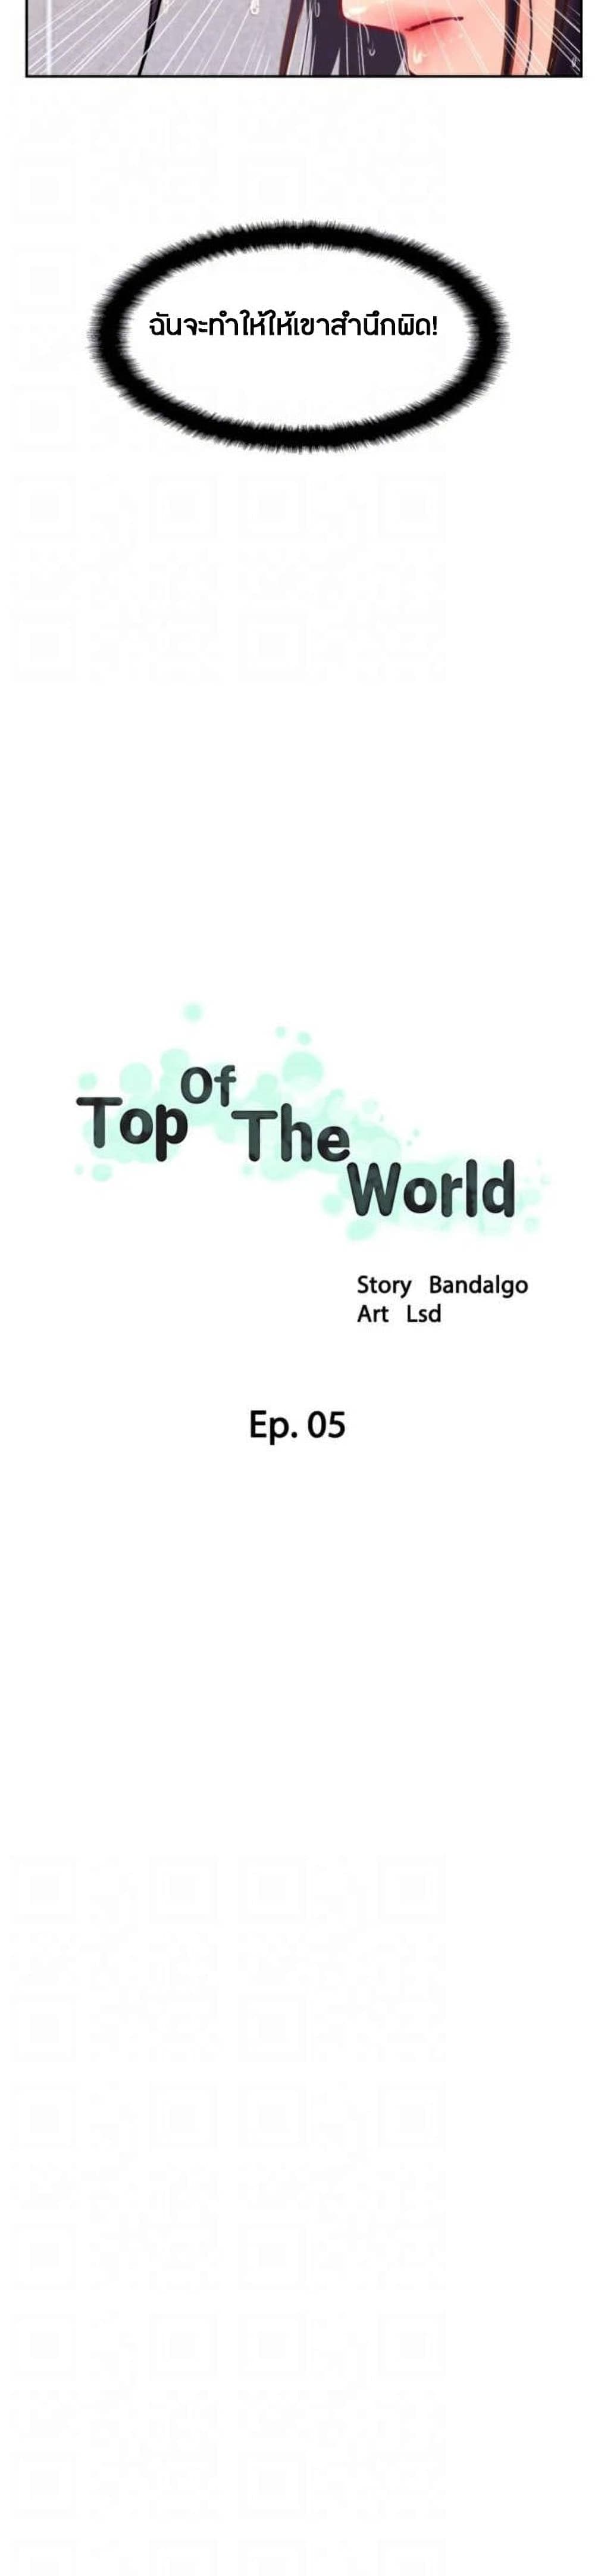 Top Of The World 5-5